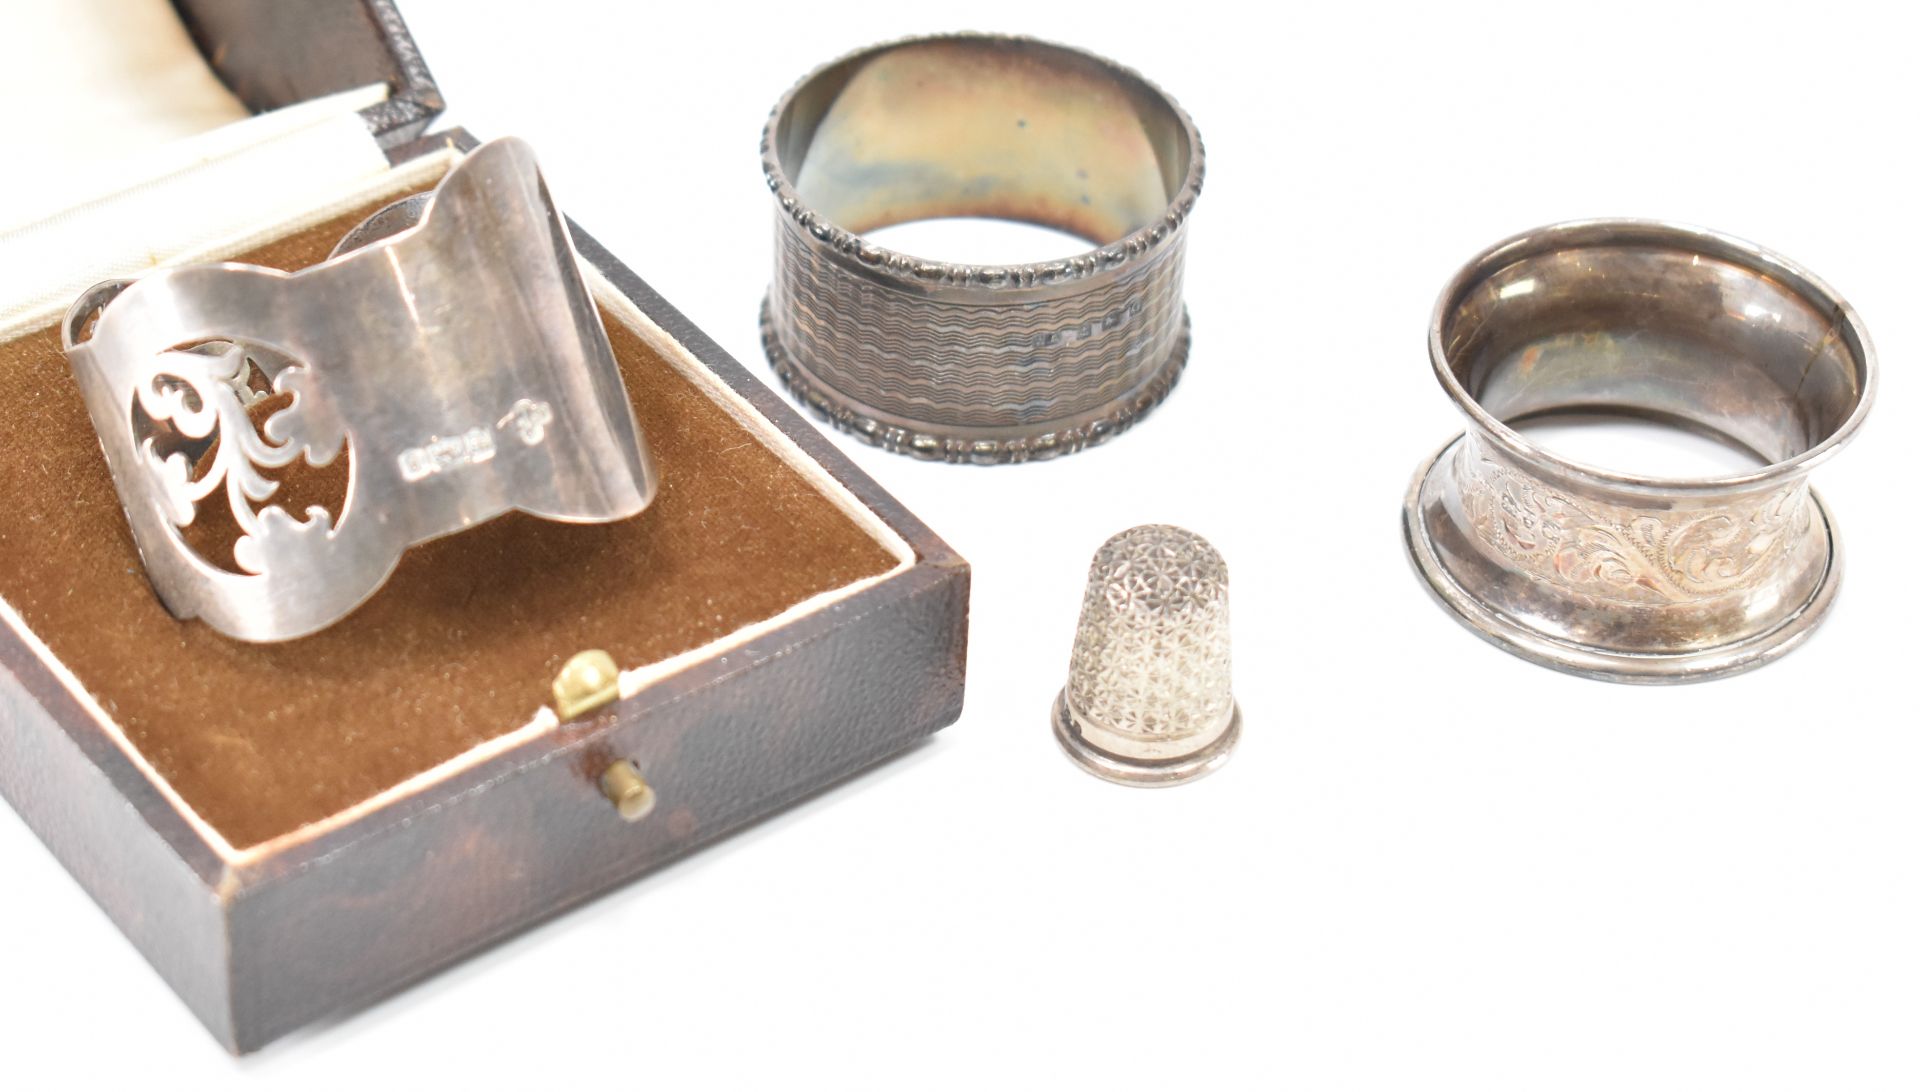 ASSORTMENT OF SILVER NAPKIN RINGS & THIMBLE - Image 4 of 4